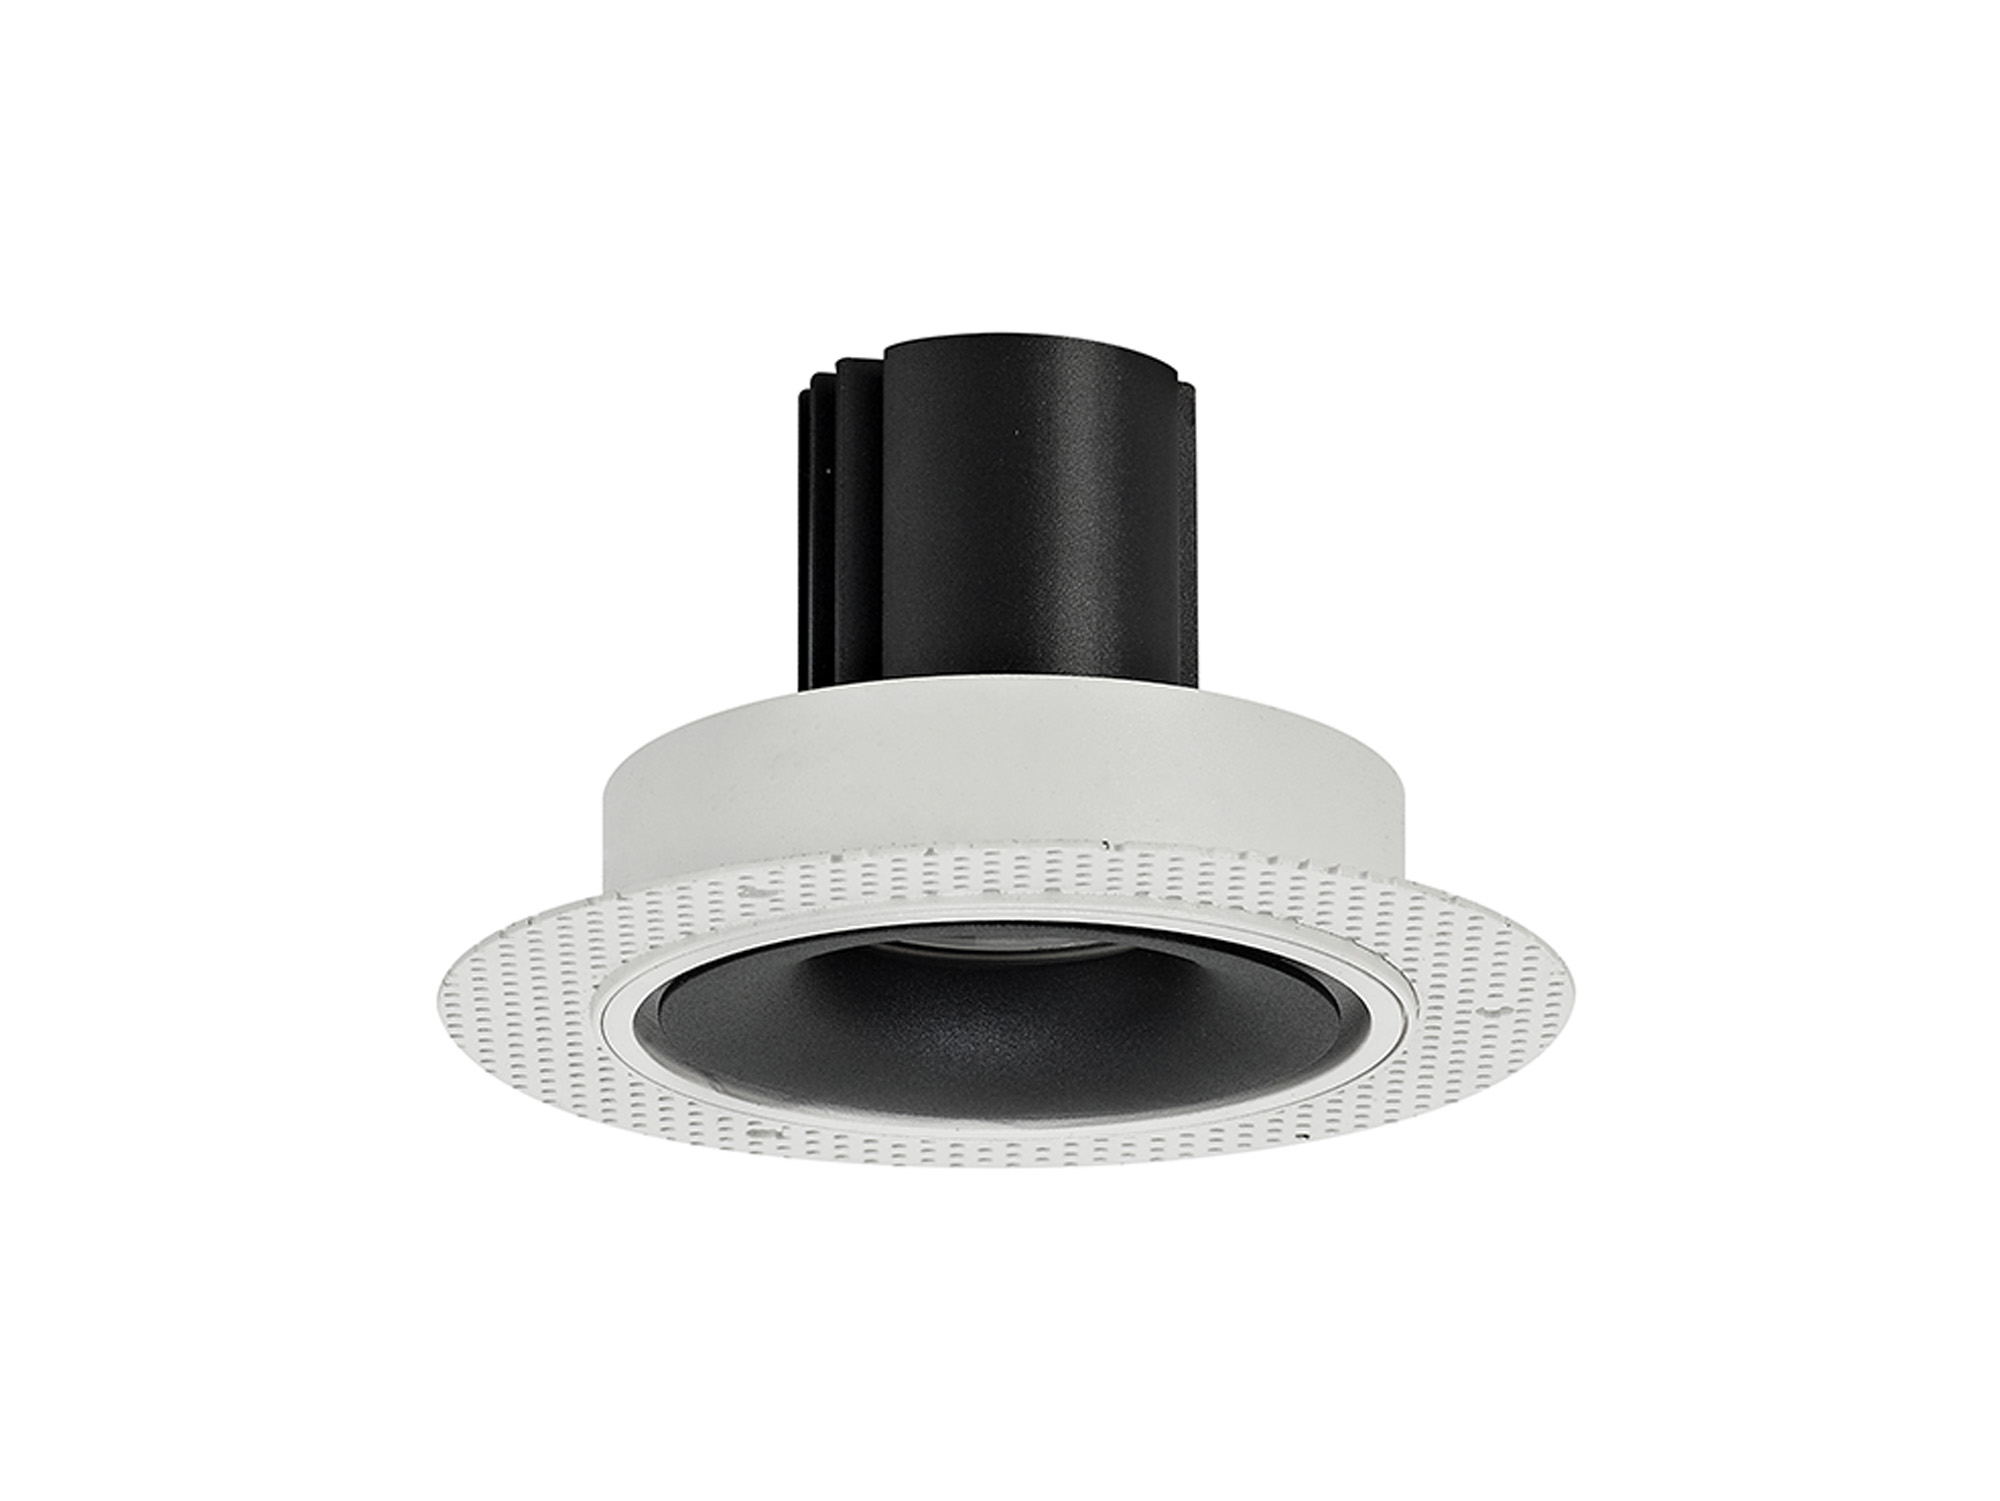 DM202072  Bolor T 9 Tridonic Powered 9W 2700K 770lm 24° CRI>90 LED Engine White/Black Trimless Fixed Recessed Spotlight, IP20